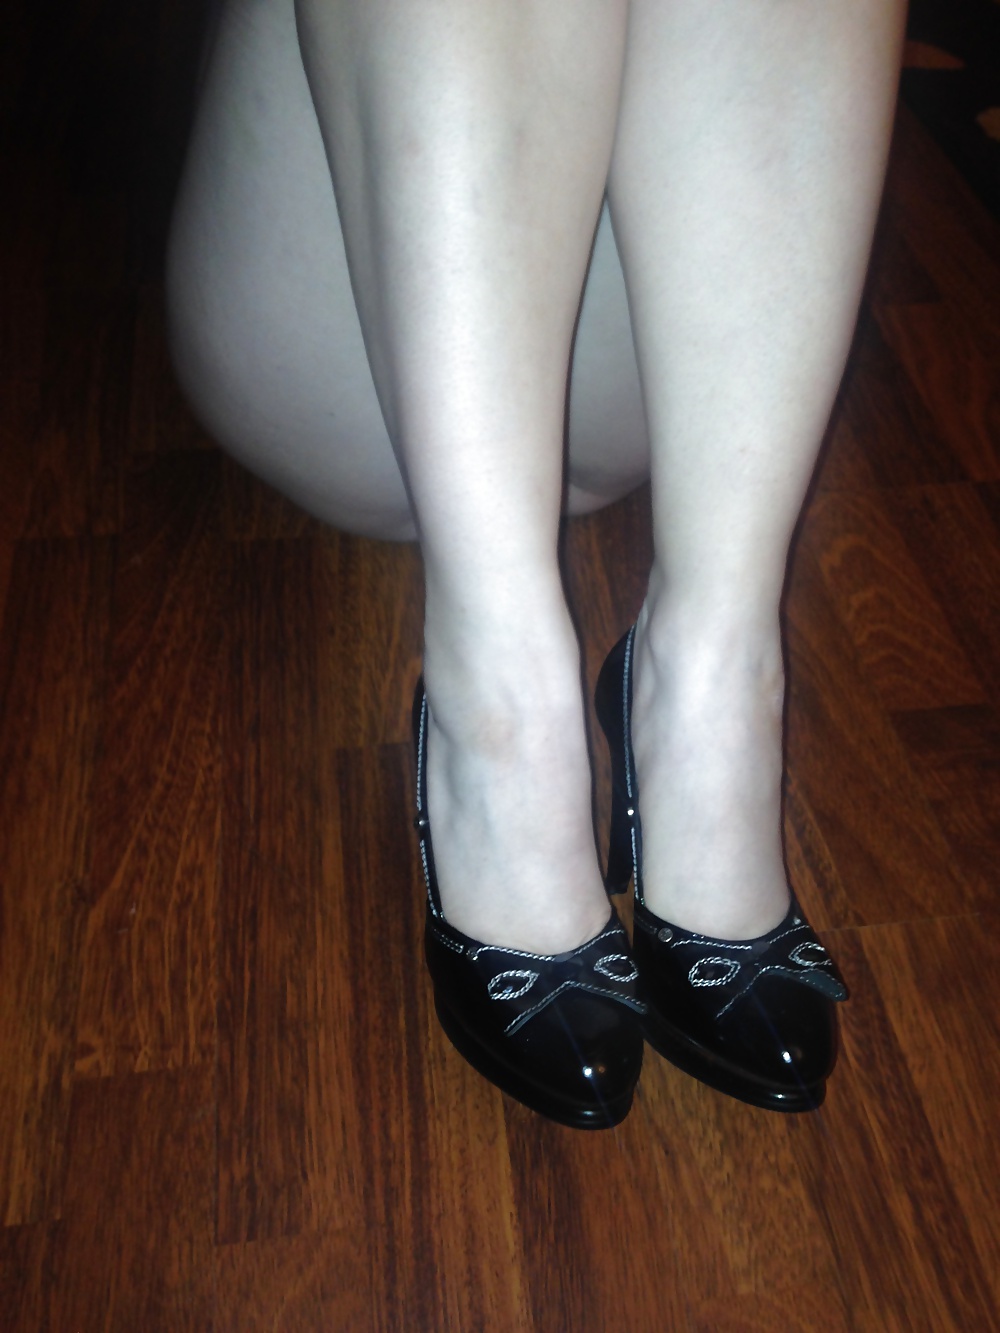 High heels from shy wife (Requests for pics wanted) #24318626